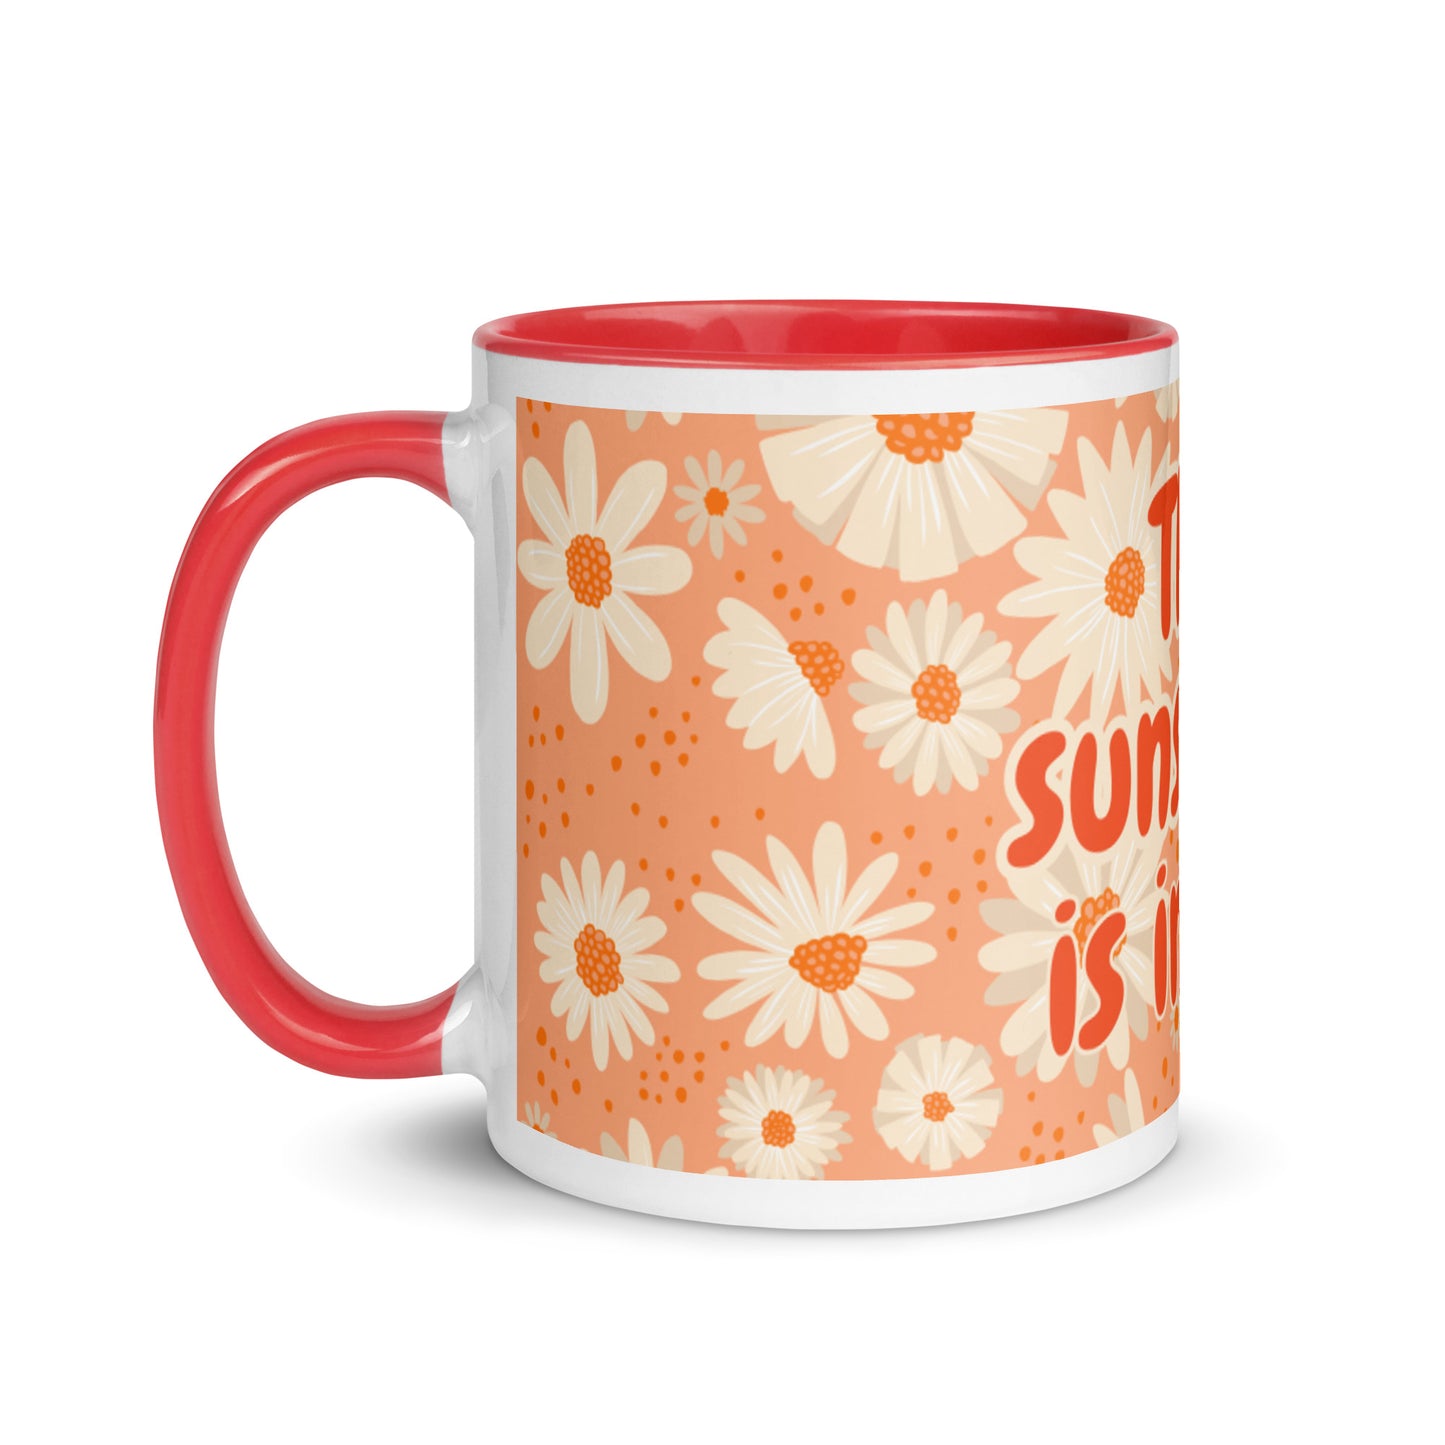 Tasse couleur marguerites pêche - The Sunshine is in me